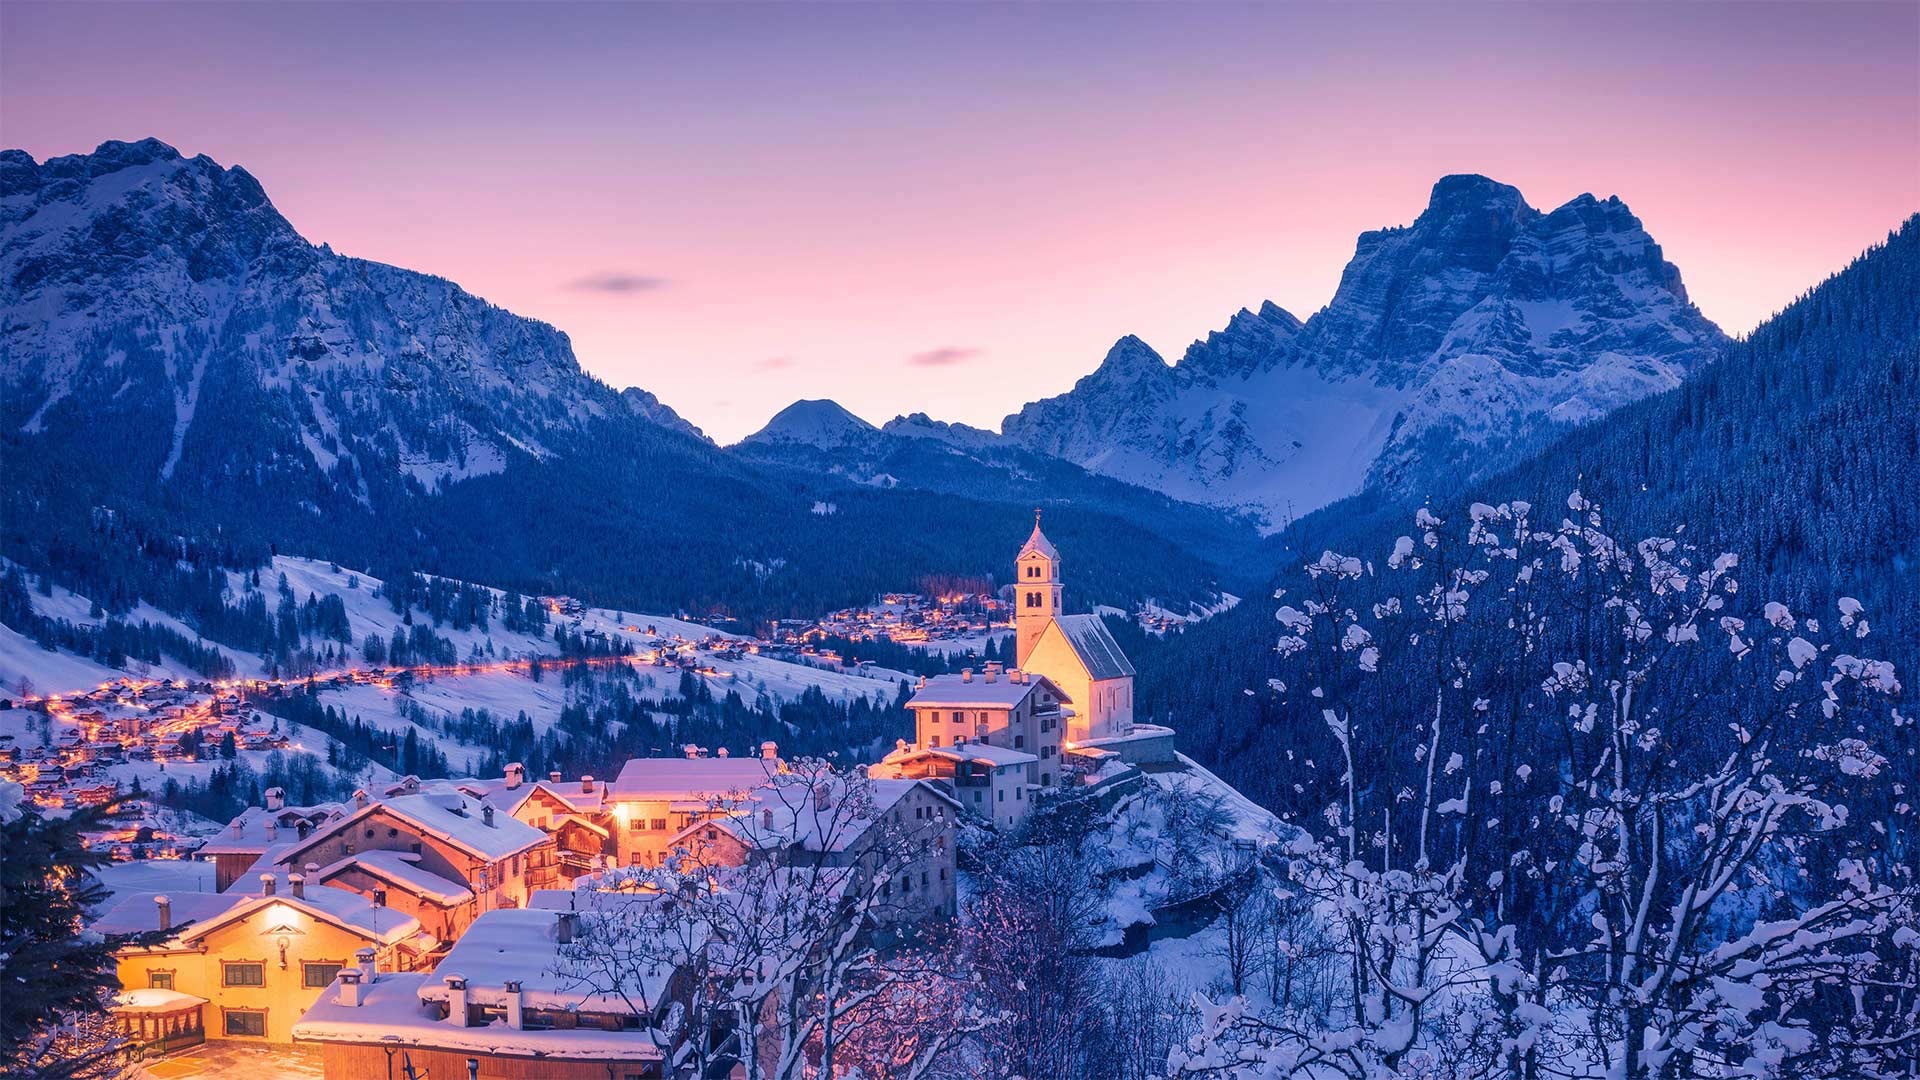 Colle Santa Lucia in the Dolomites, Italy - mauritius images GmbH/Alamy)